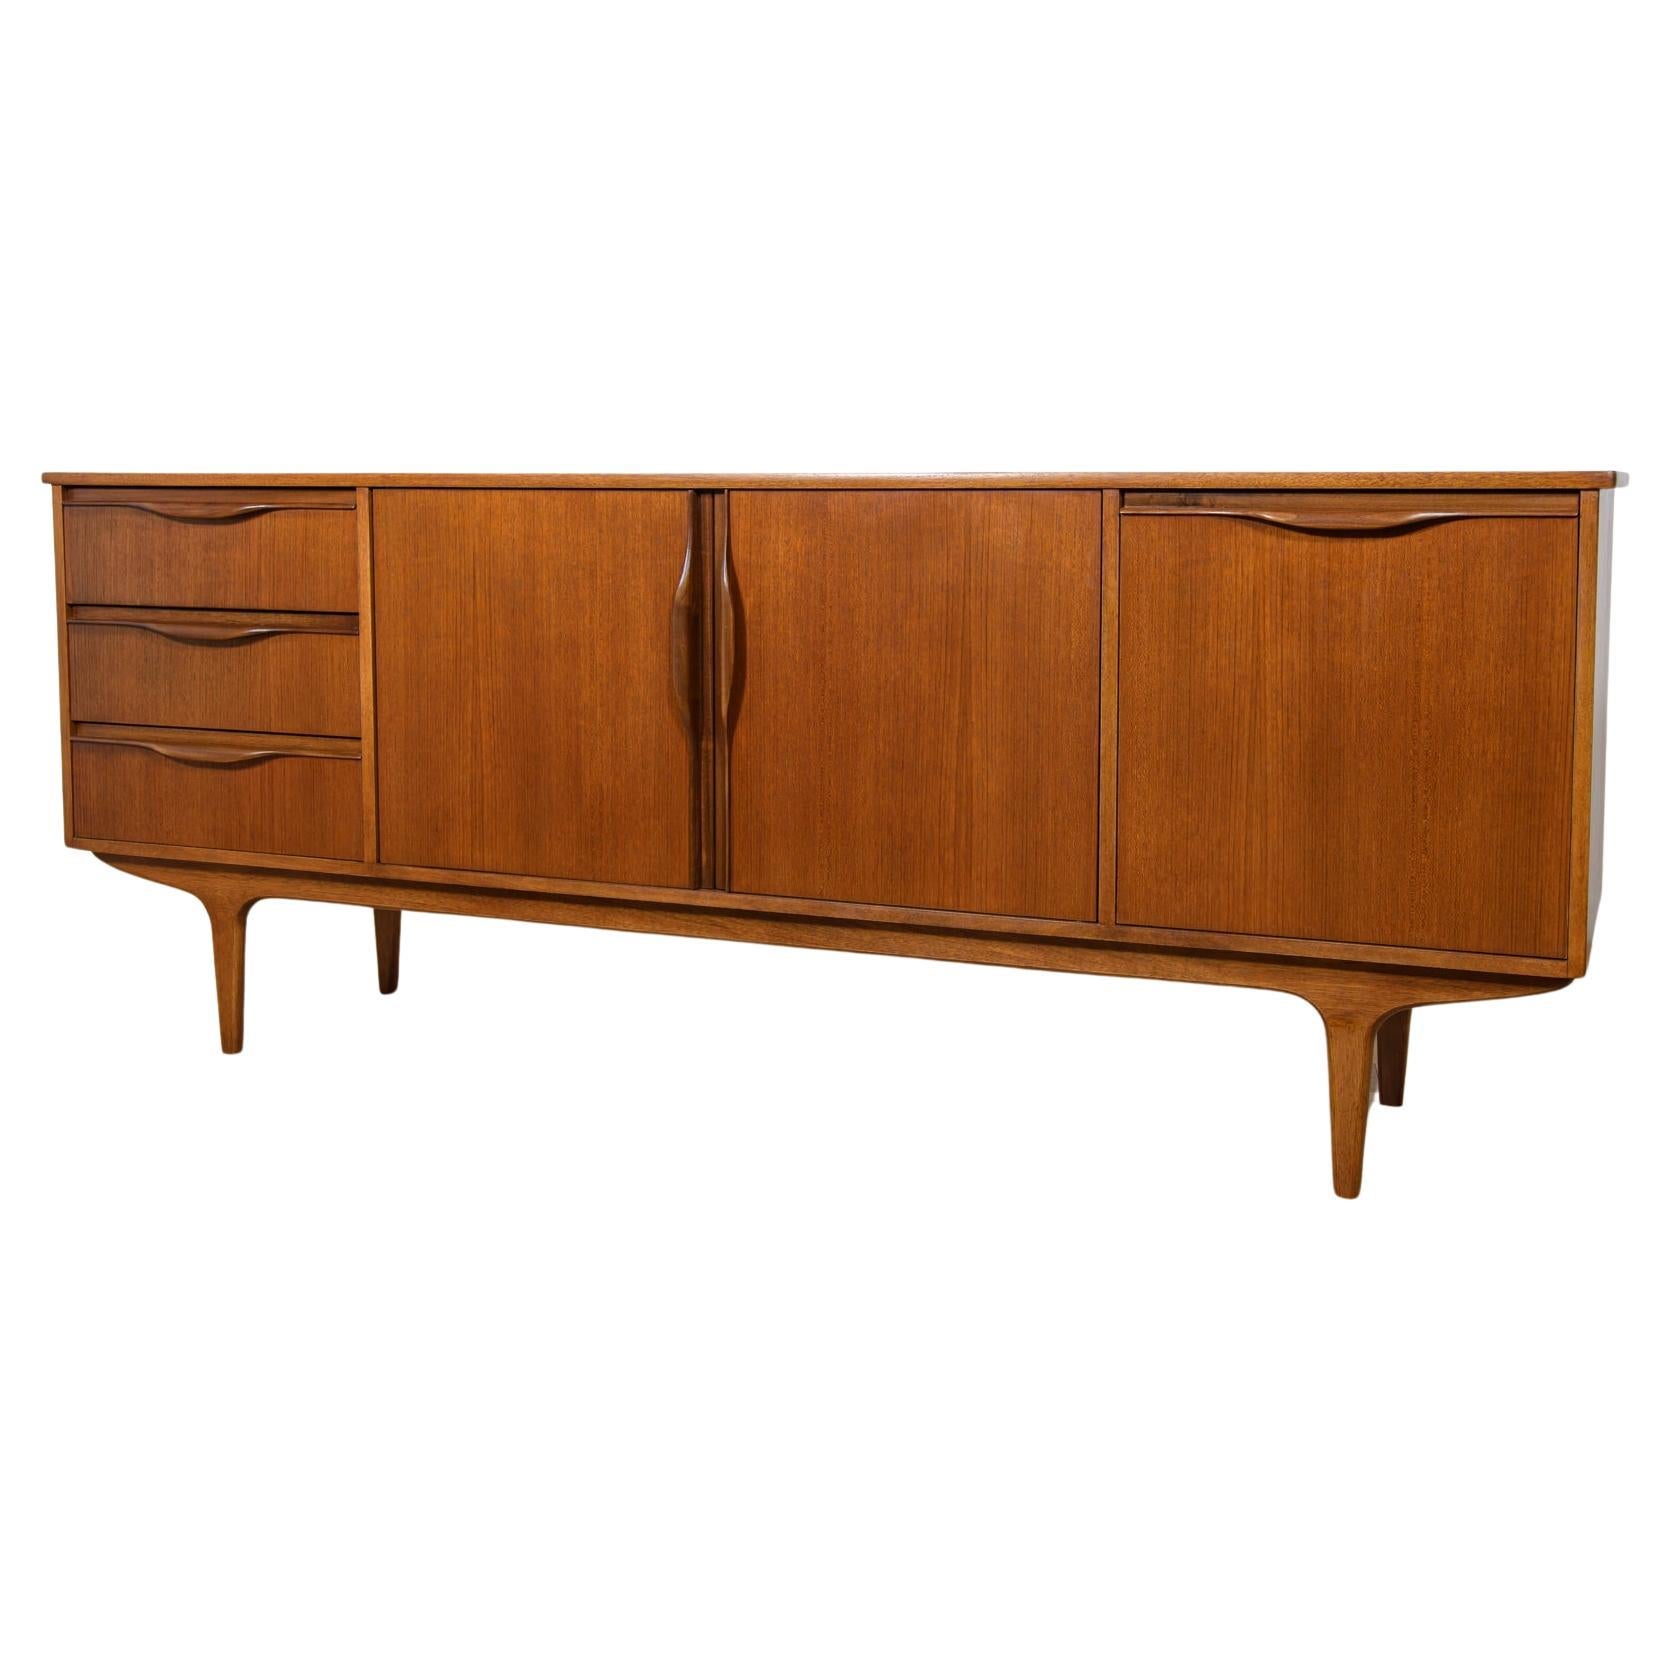 Mid-Century Teak Sideboard from Jentique, 1960s For Sale